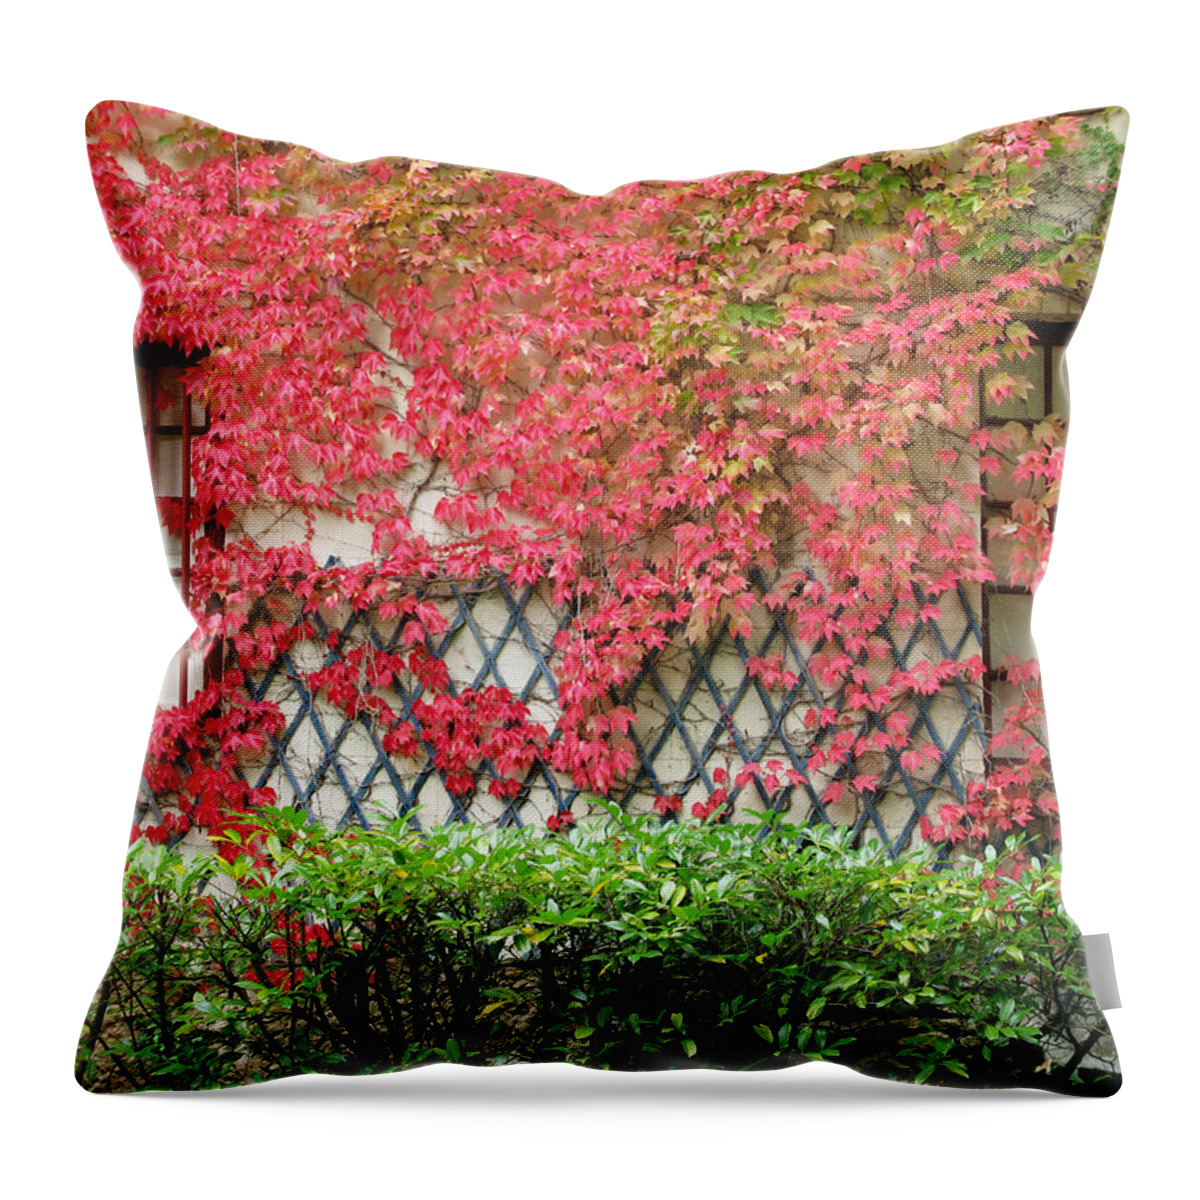 Fall Leaves Throw Pillow featuring the photograph Chateau Chenonceau Vines on Wall Image One by Randi Kuhne